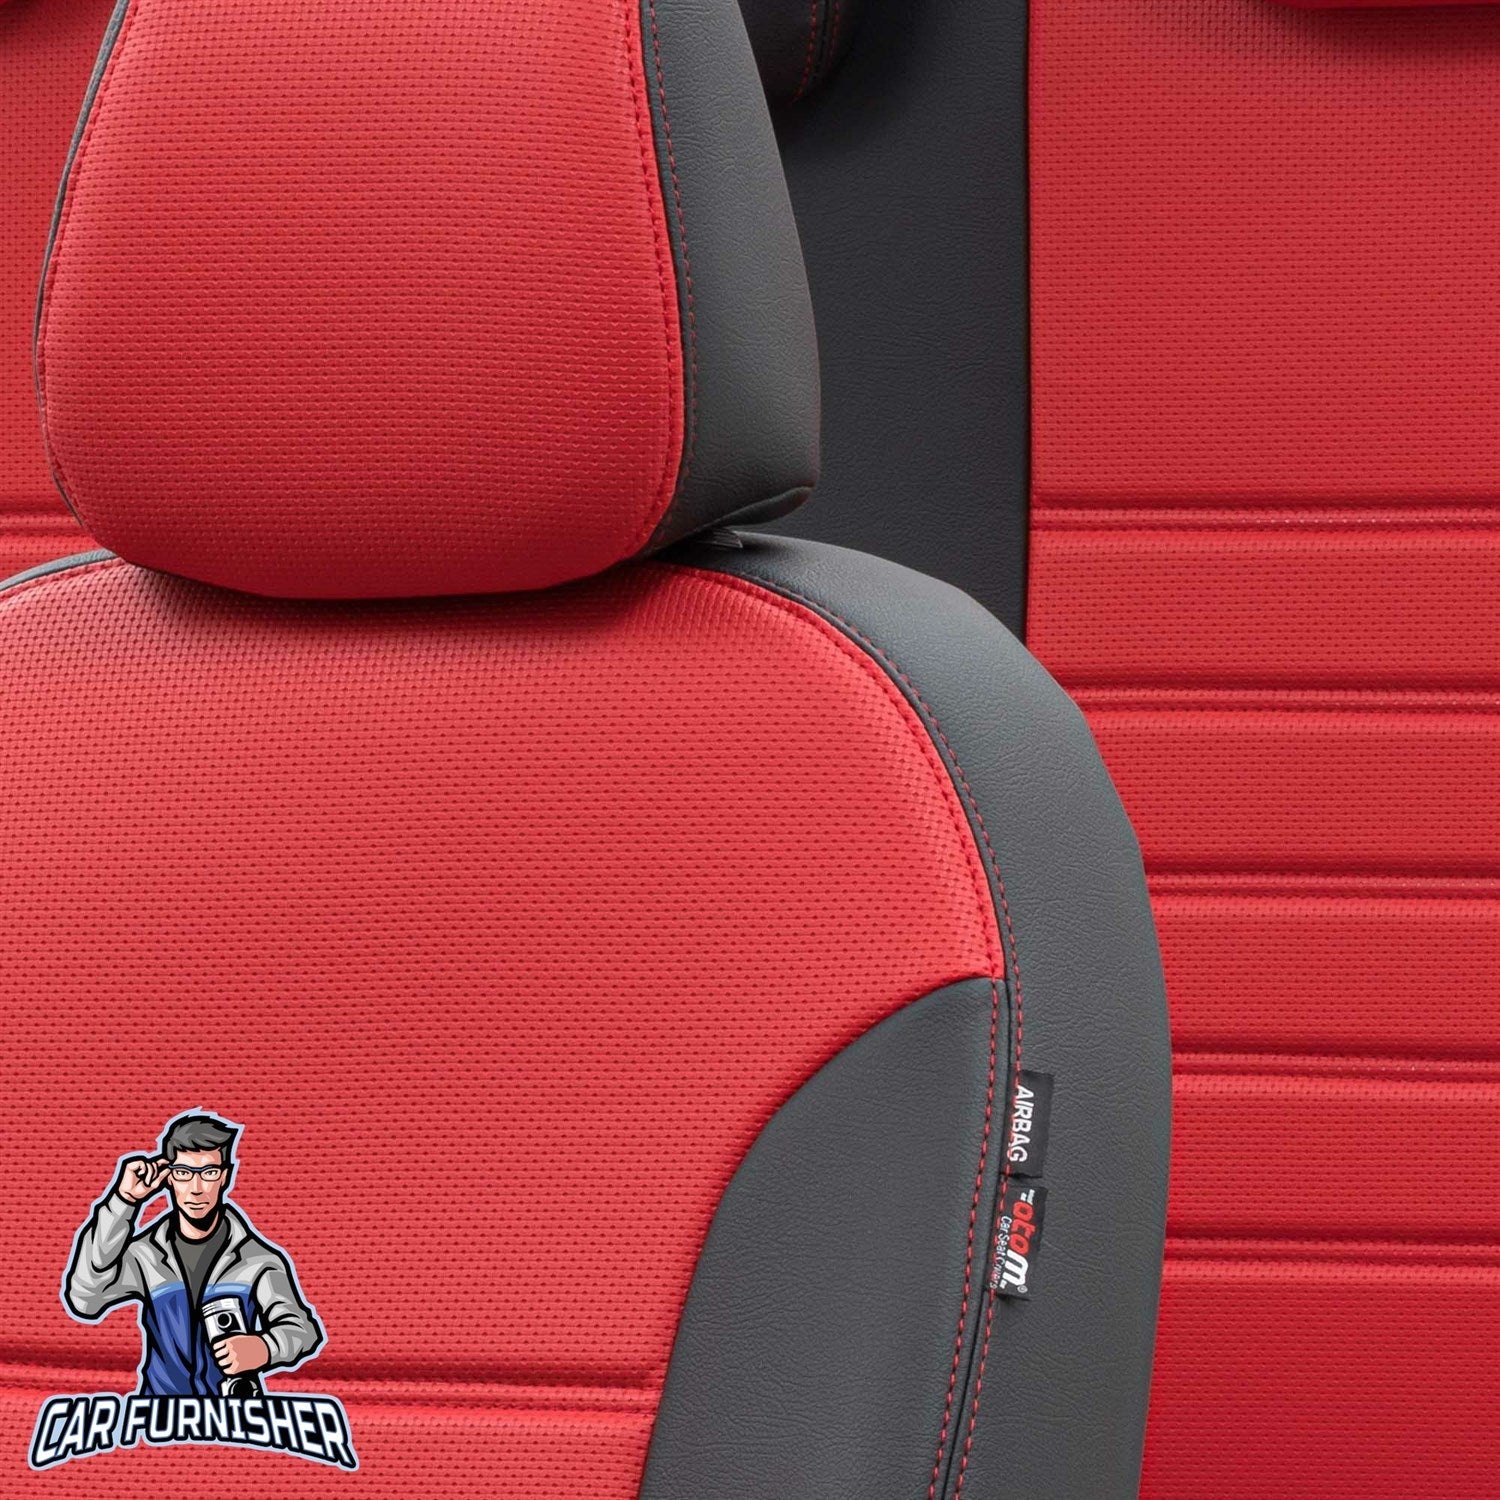 Volvo XC90 Seat Cover New York Leather Design Red Leather